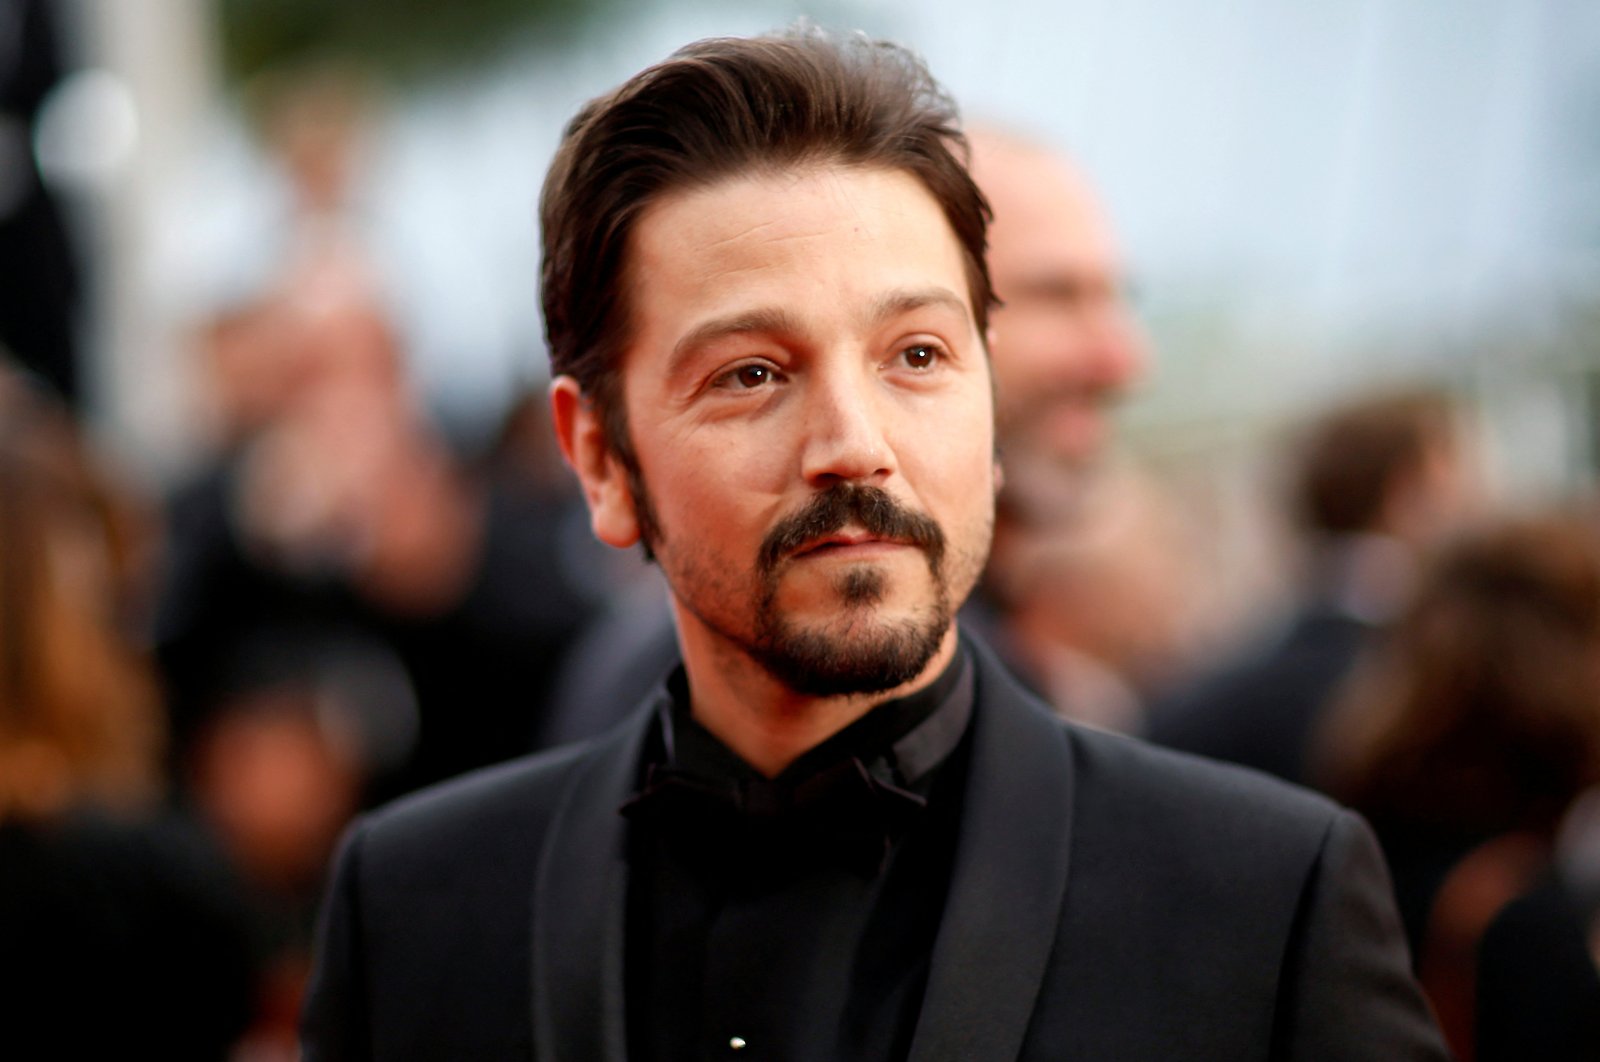 Diego Luna poses for a photo at the 72nd Cannes Film Festival, in Cannes, France, May 20, 2019. (Reuters Photo)